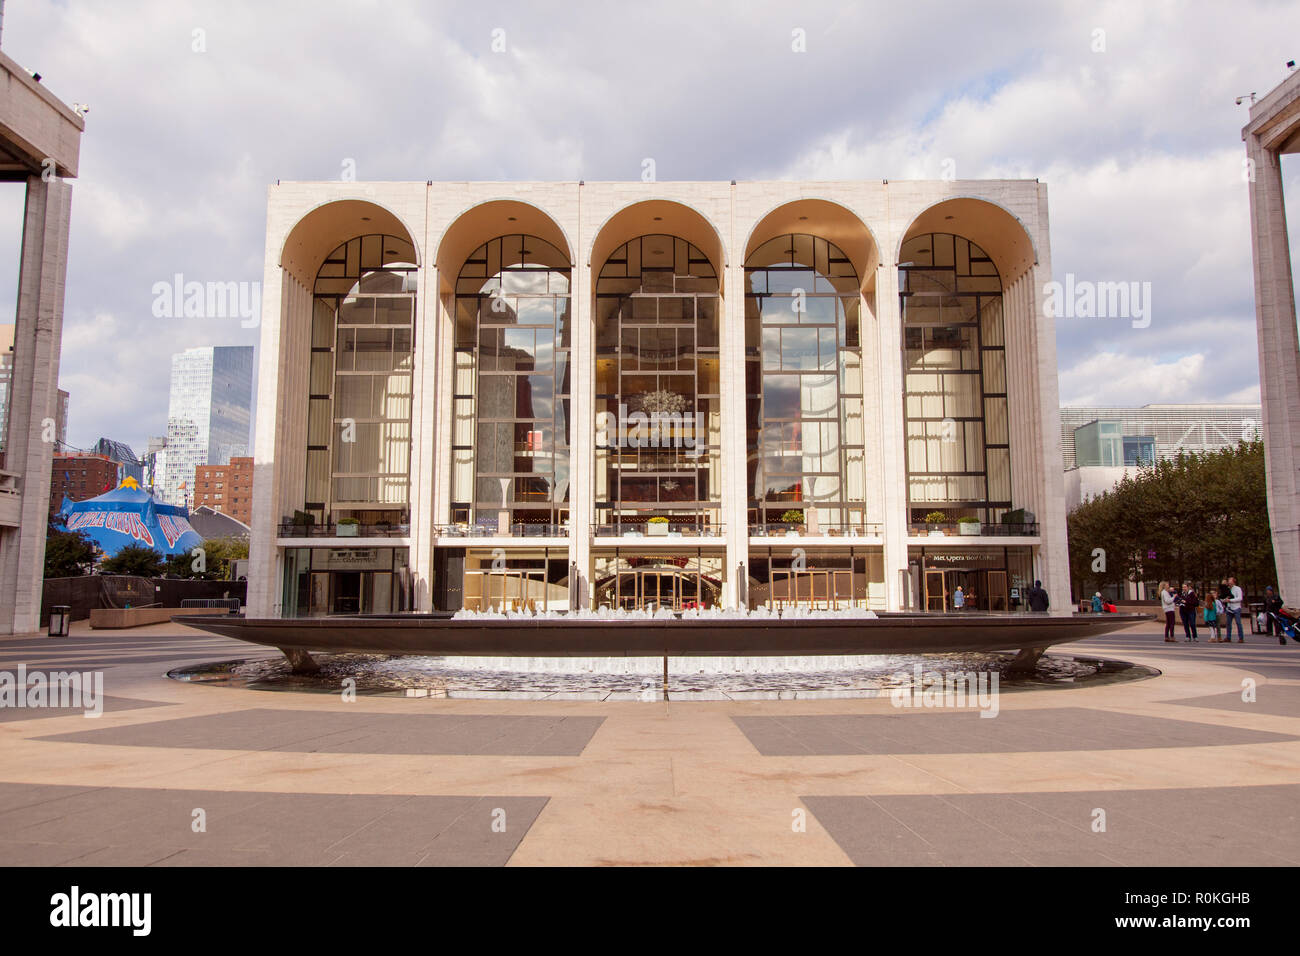 Lincoln Center Performing Arts center, Broadway, New York City, United States of America.USA Stock Photo